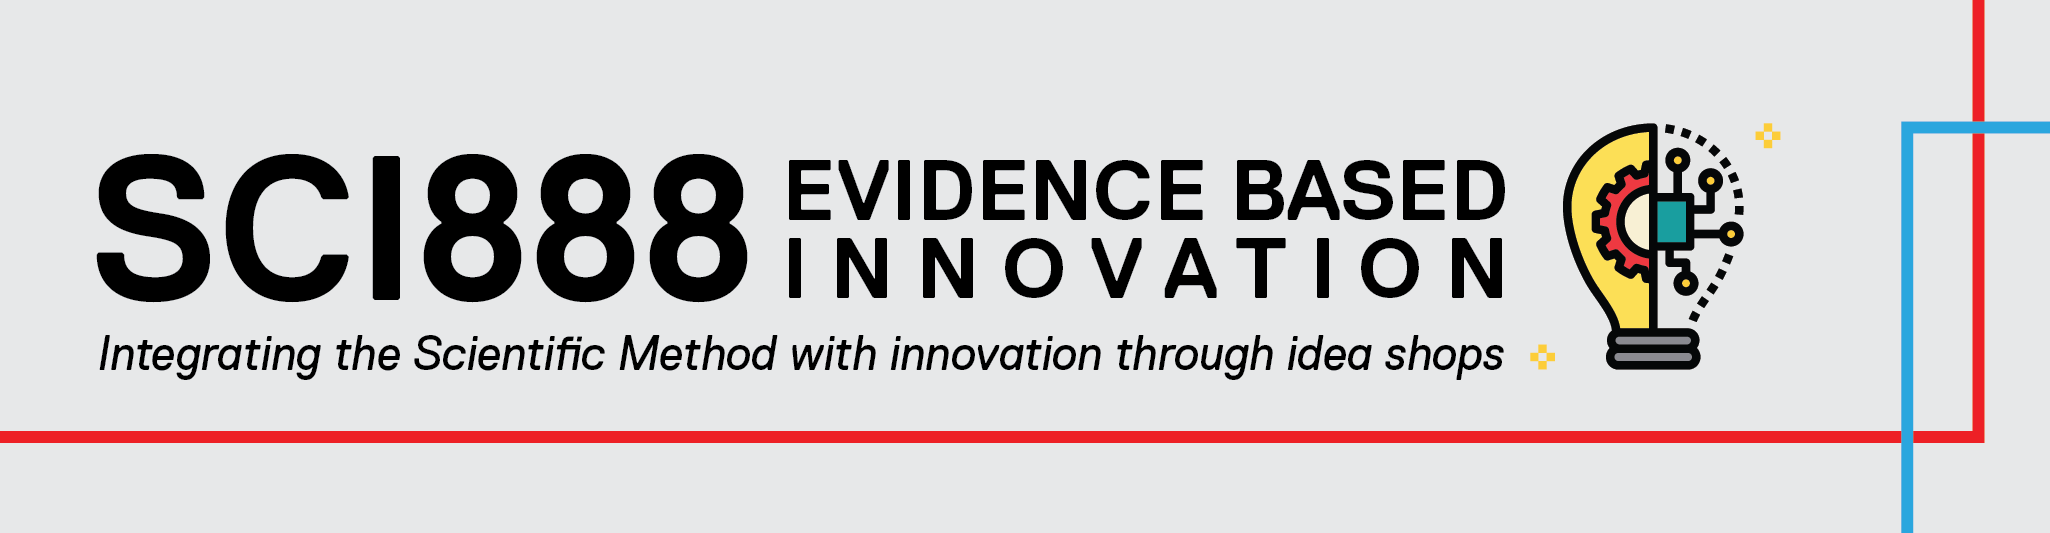 SCI888: Evidence Based Innovation: Integrating the Scientific Method with Innovation through Idea Shops